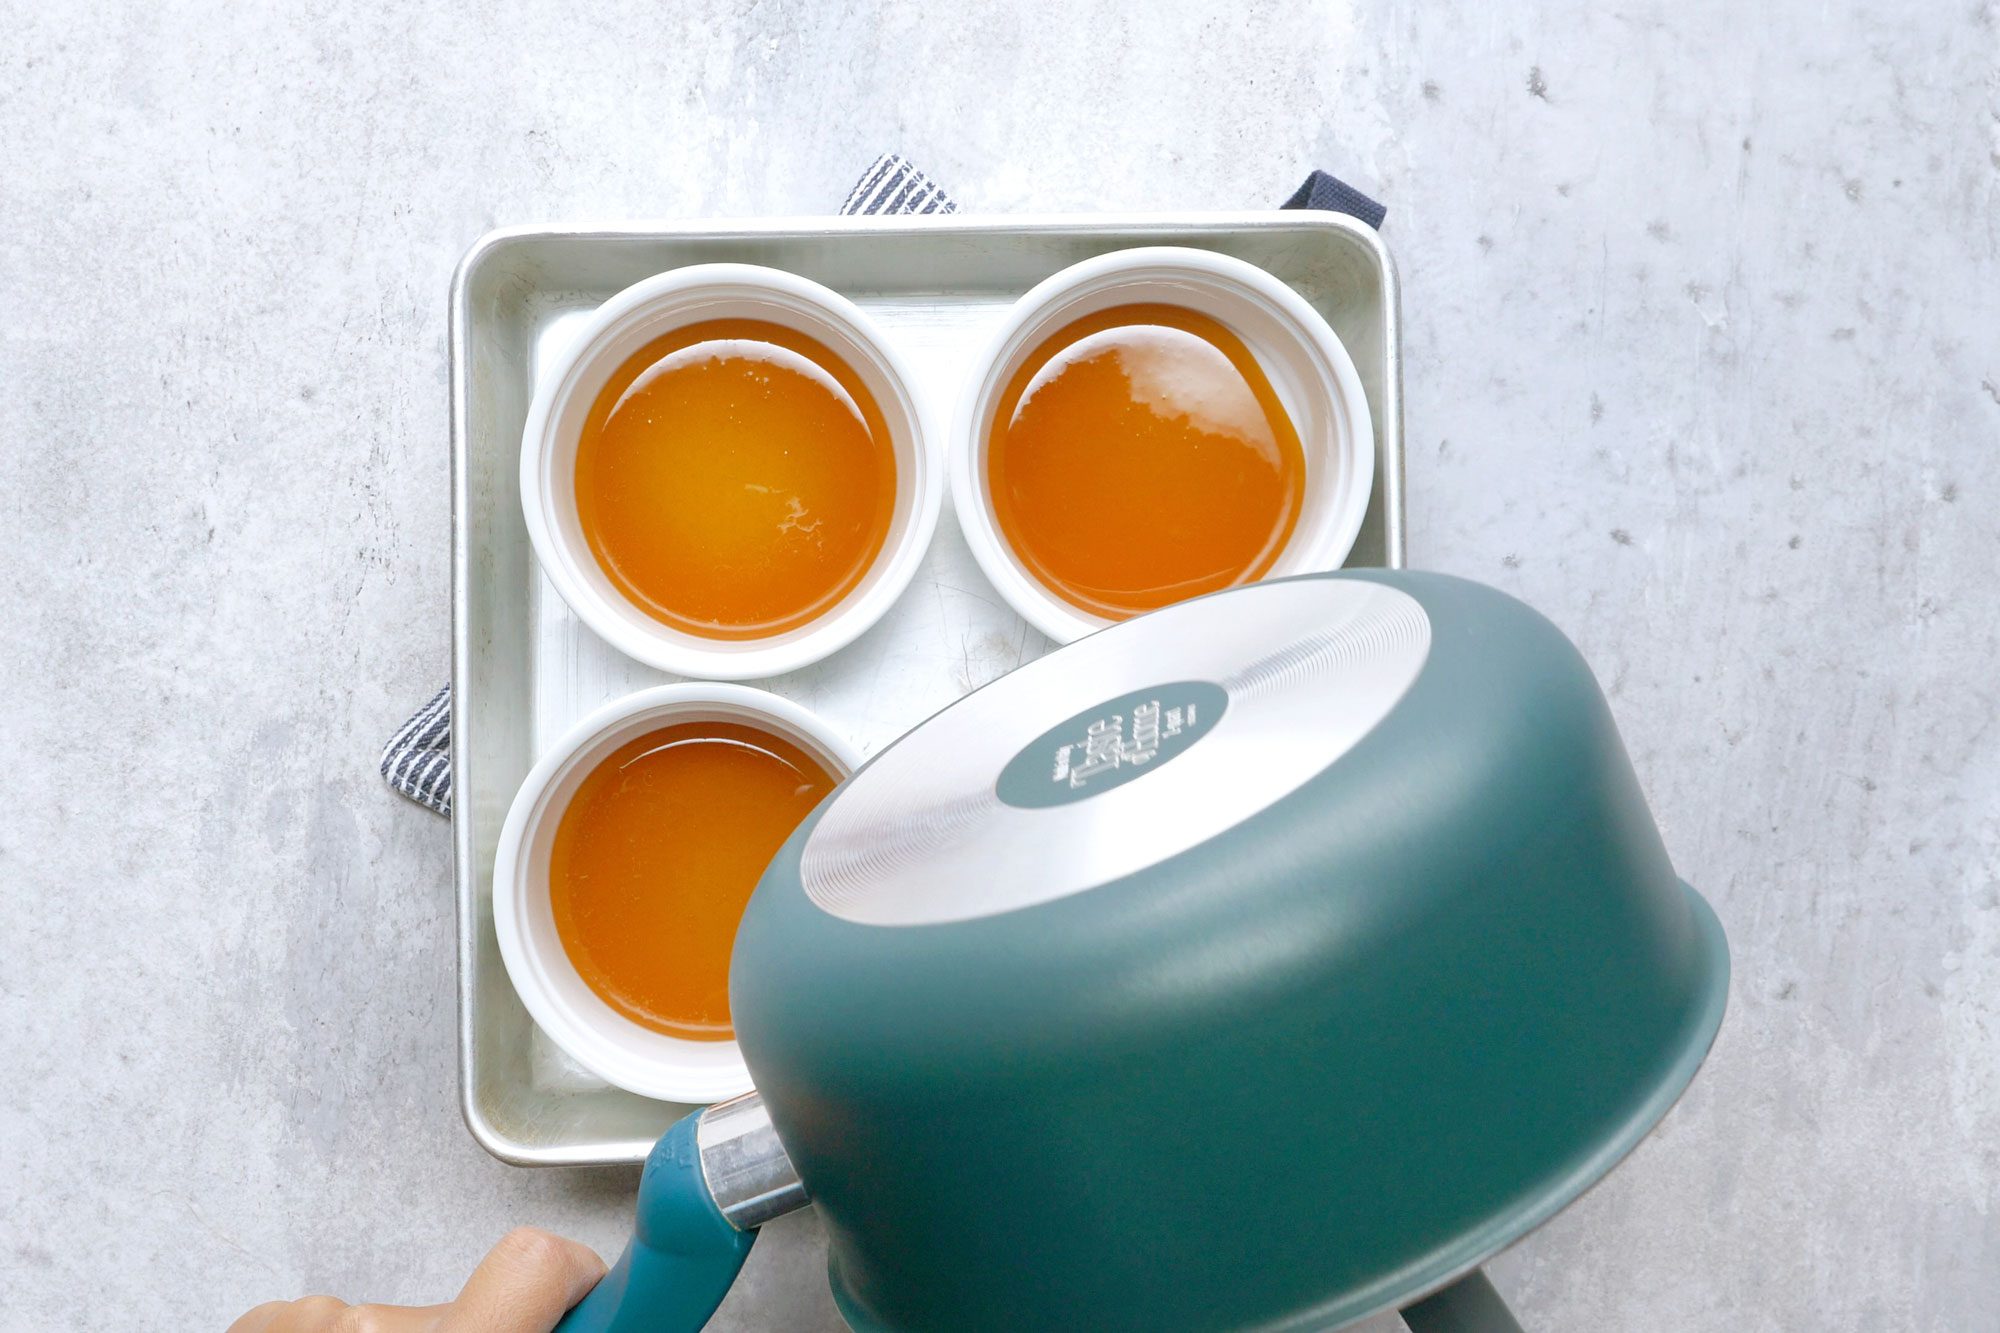 Pour the syrup into eight 6-ounce custard cups